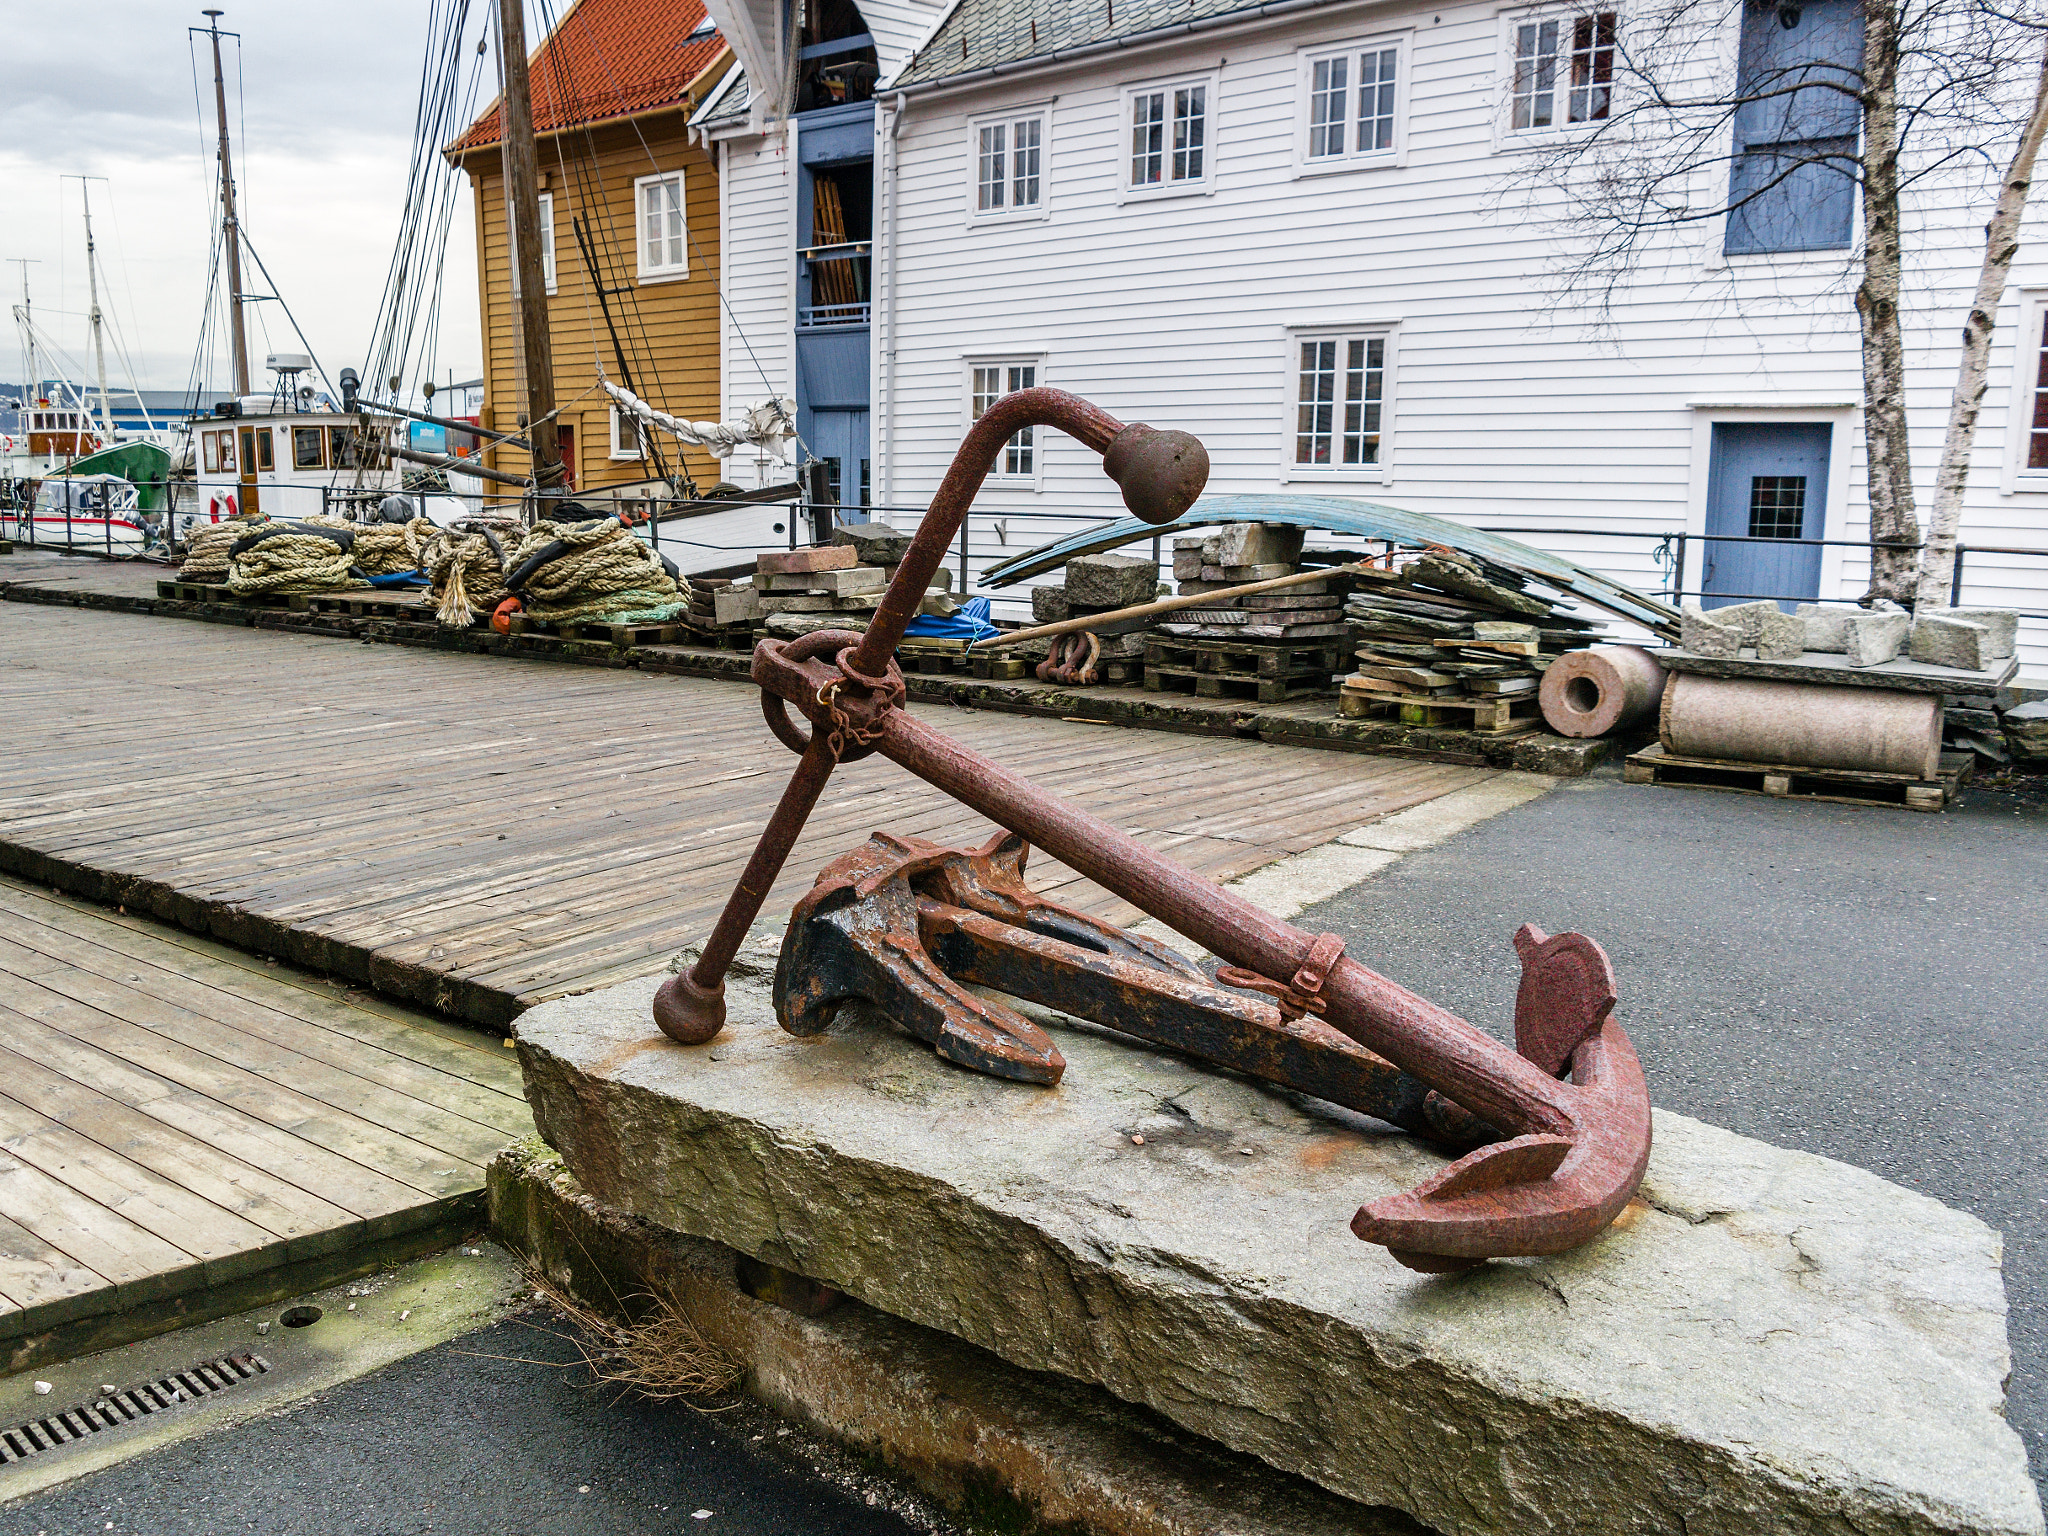 Samsung NX30 + Samsung NX 18-55mm F3.5-5.6 OIS sample photo. "norwegian fisheries museum - the entrance" photography